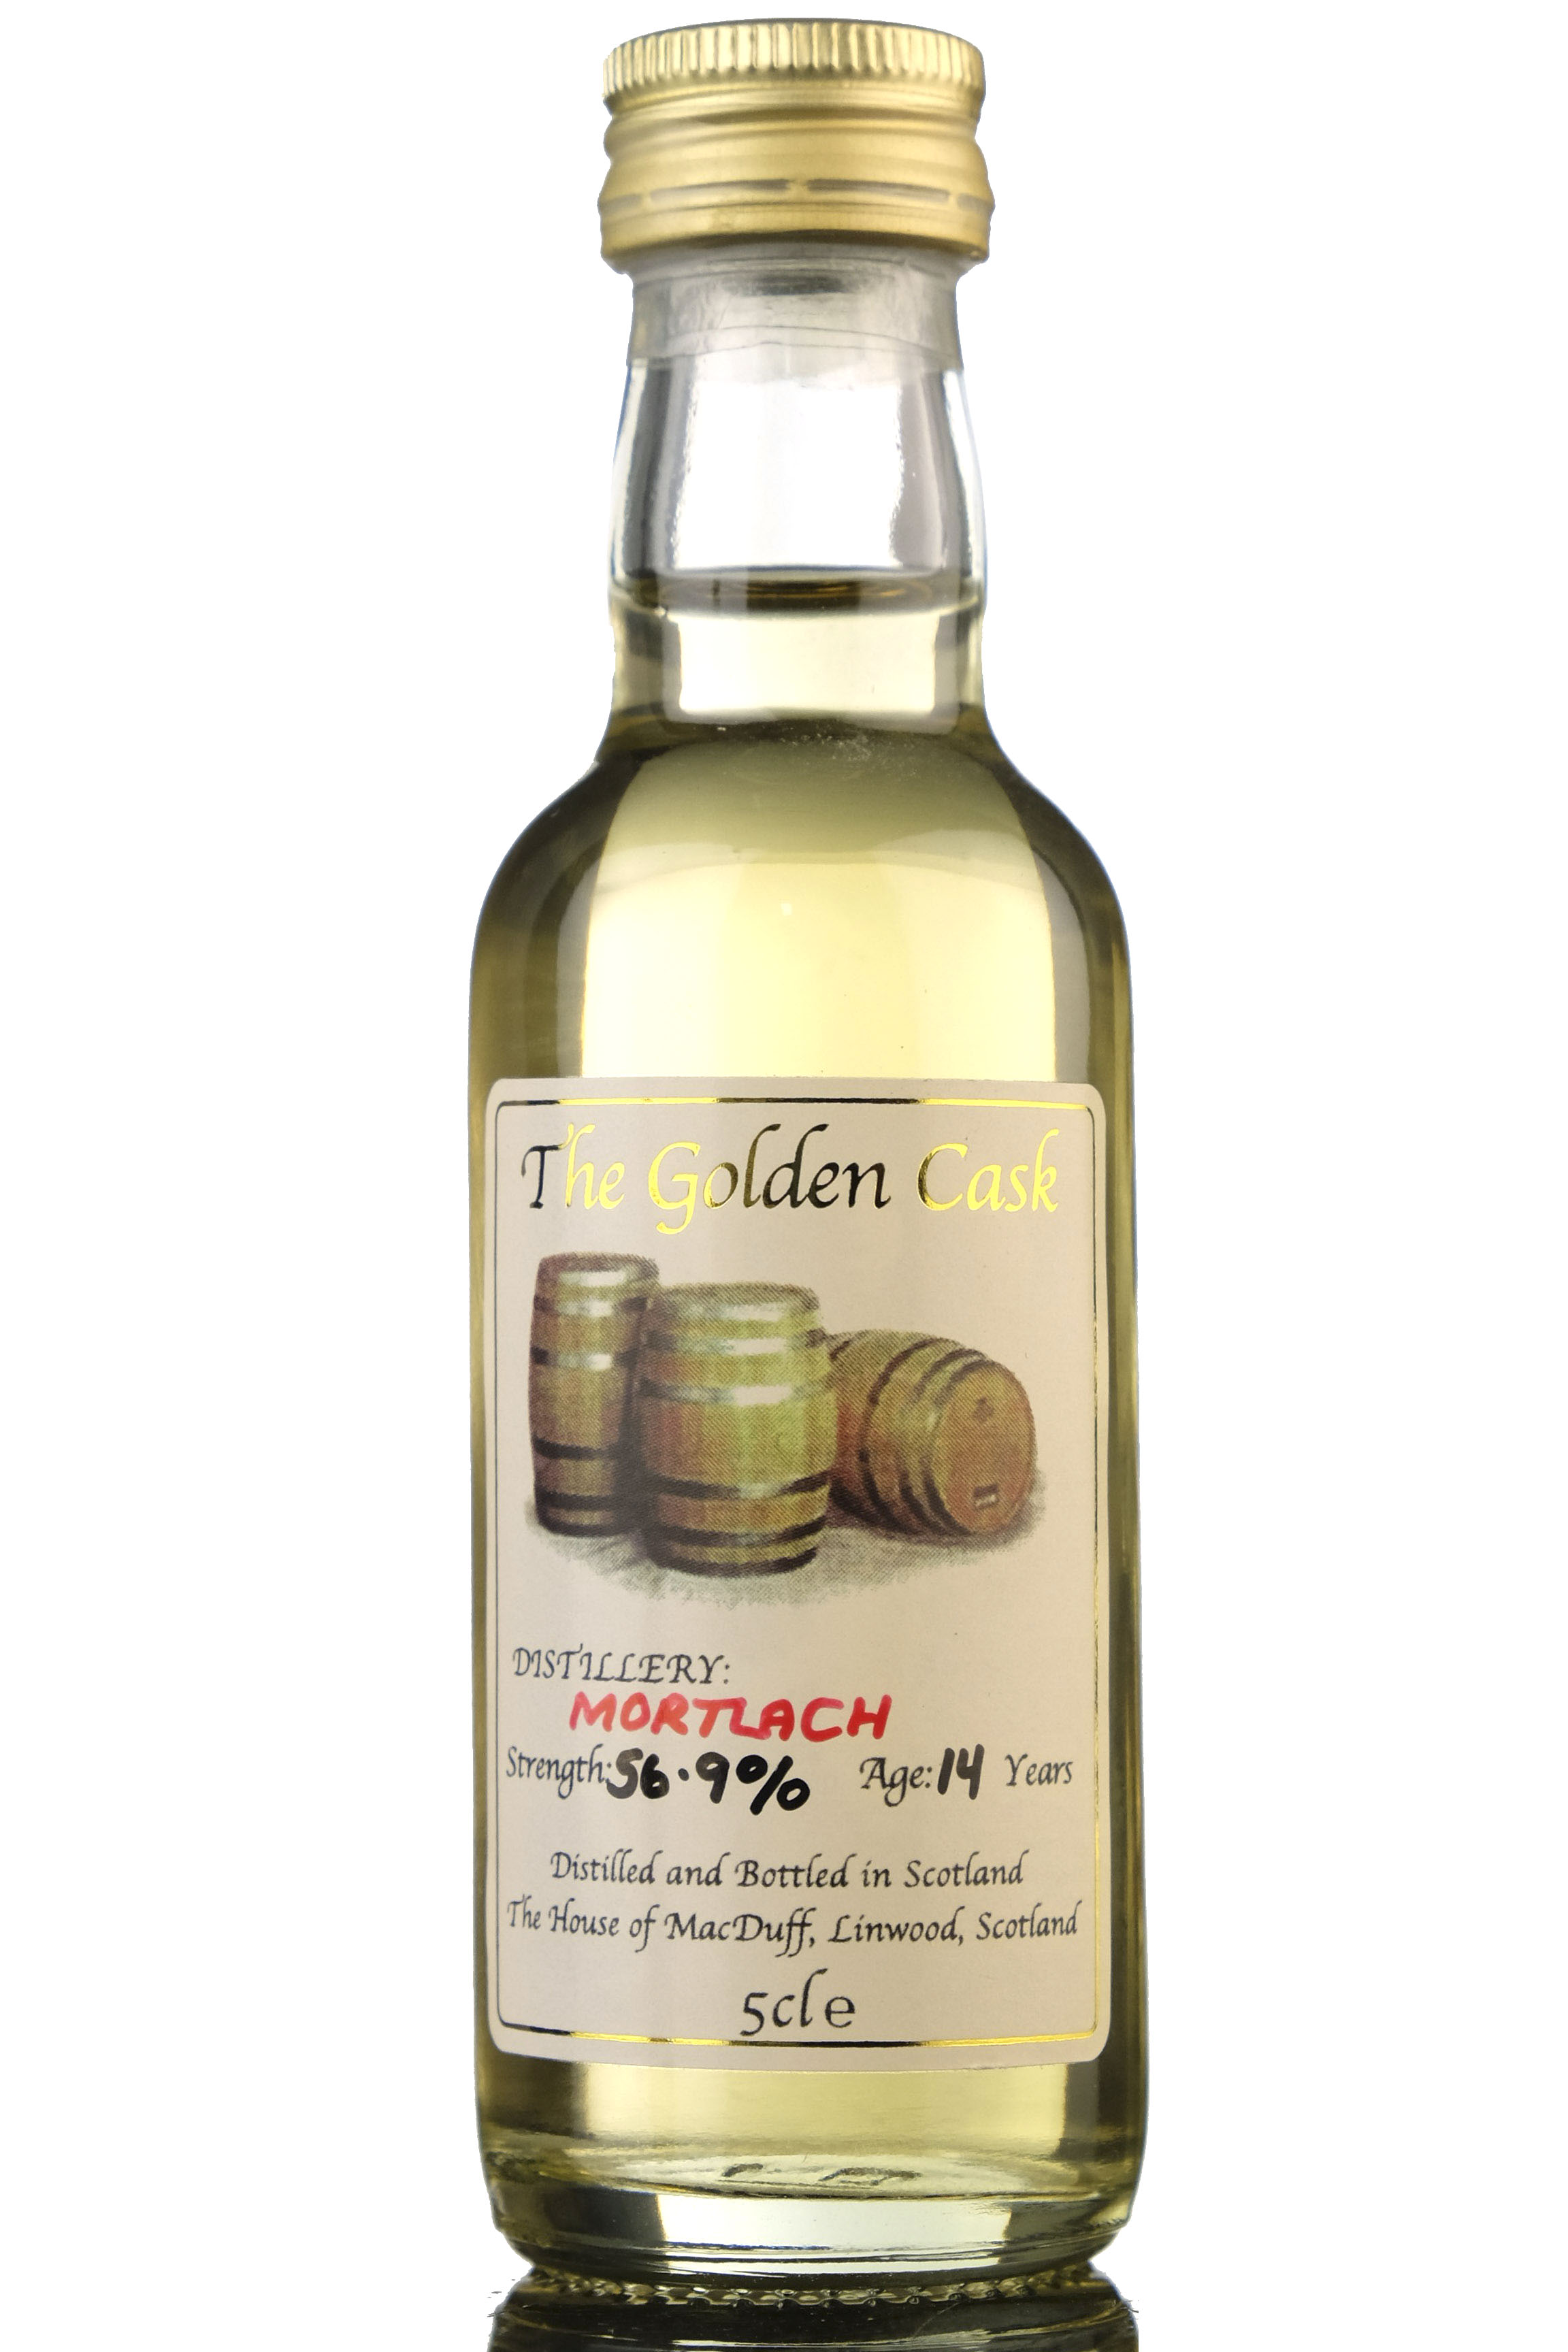 Mortlach 14 Year Old - The Golden Cask Miniature